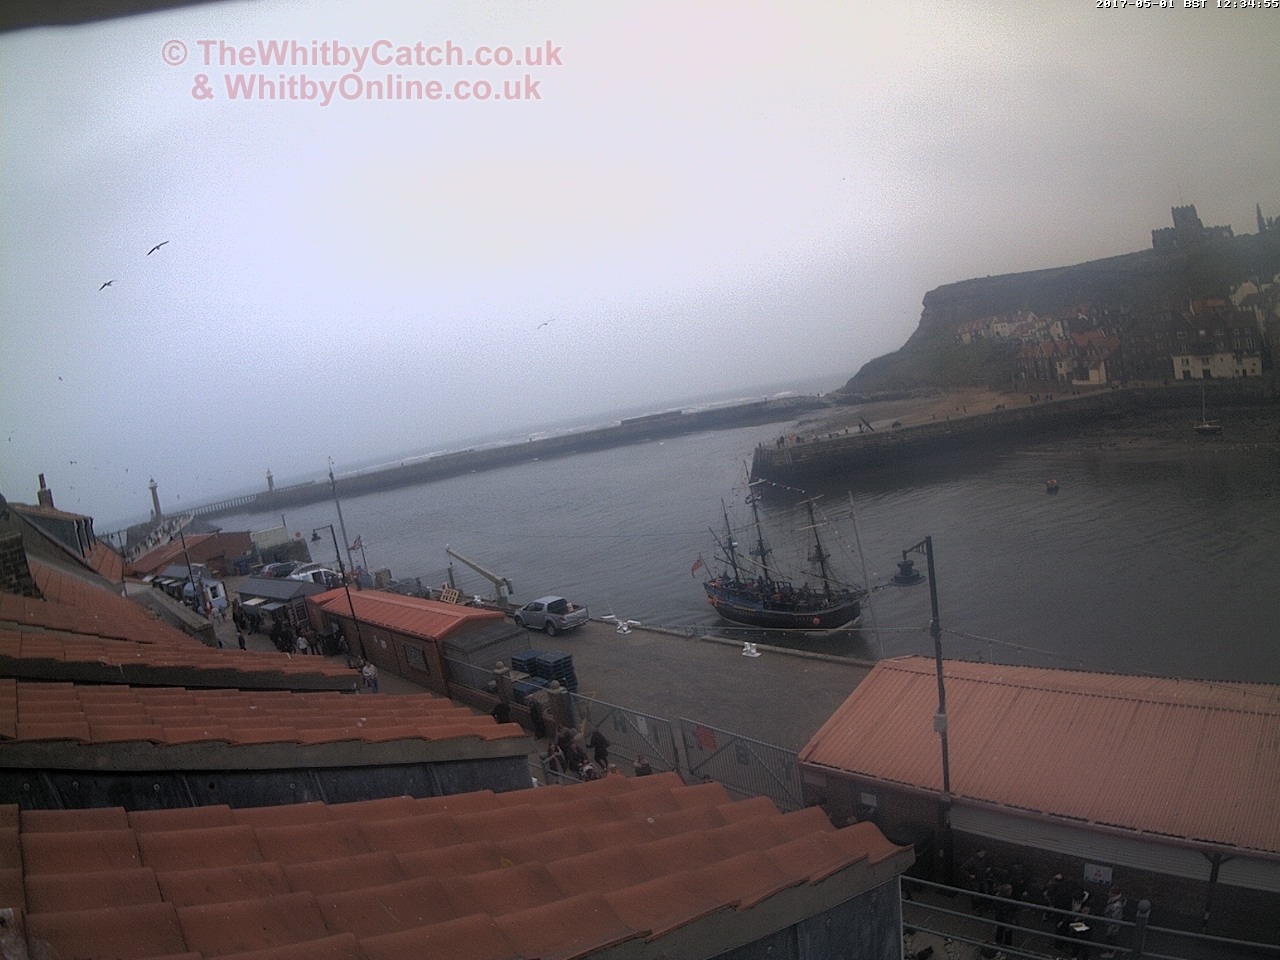 Whitby Mon 1st May 2017 12:35.